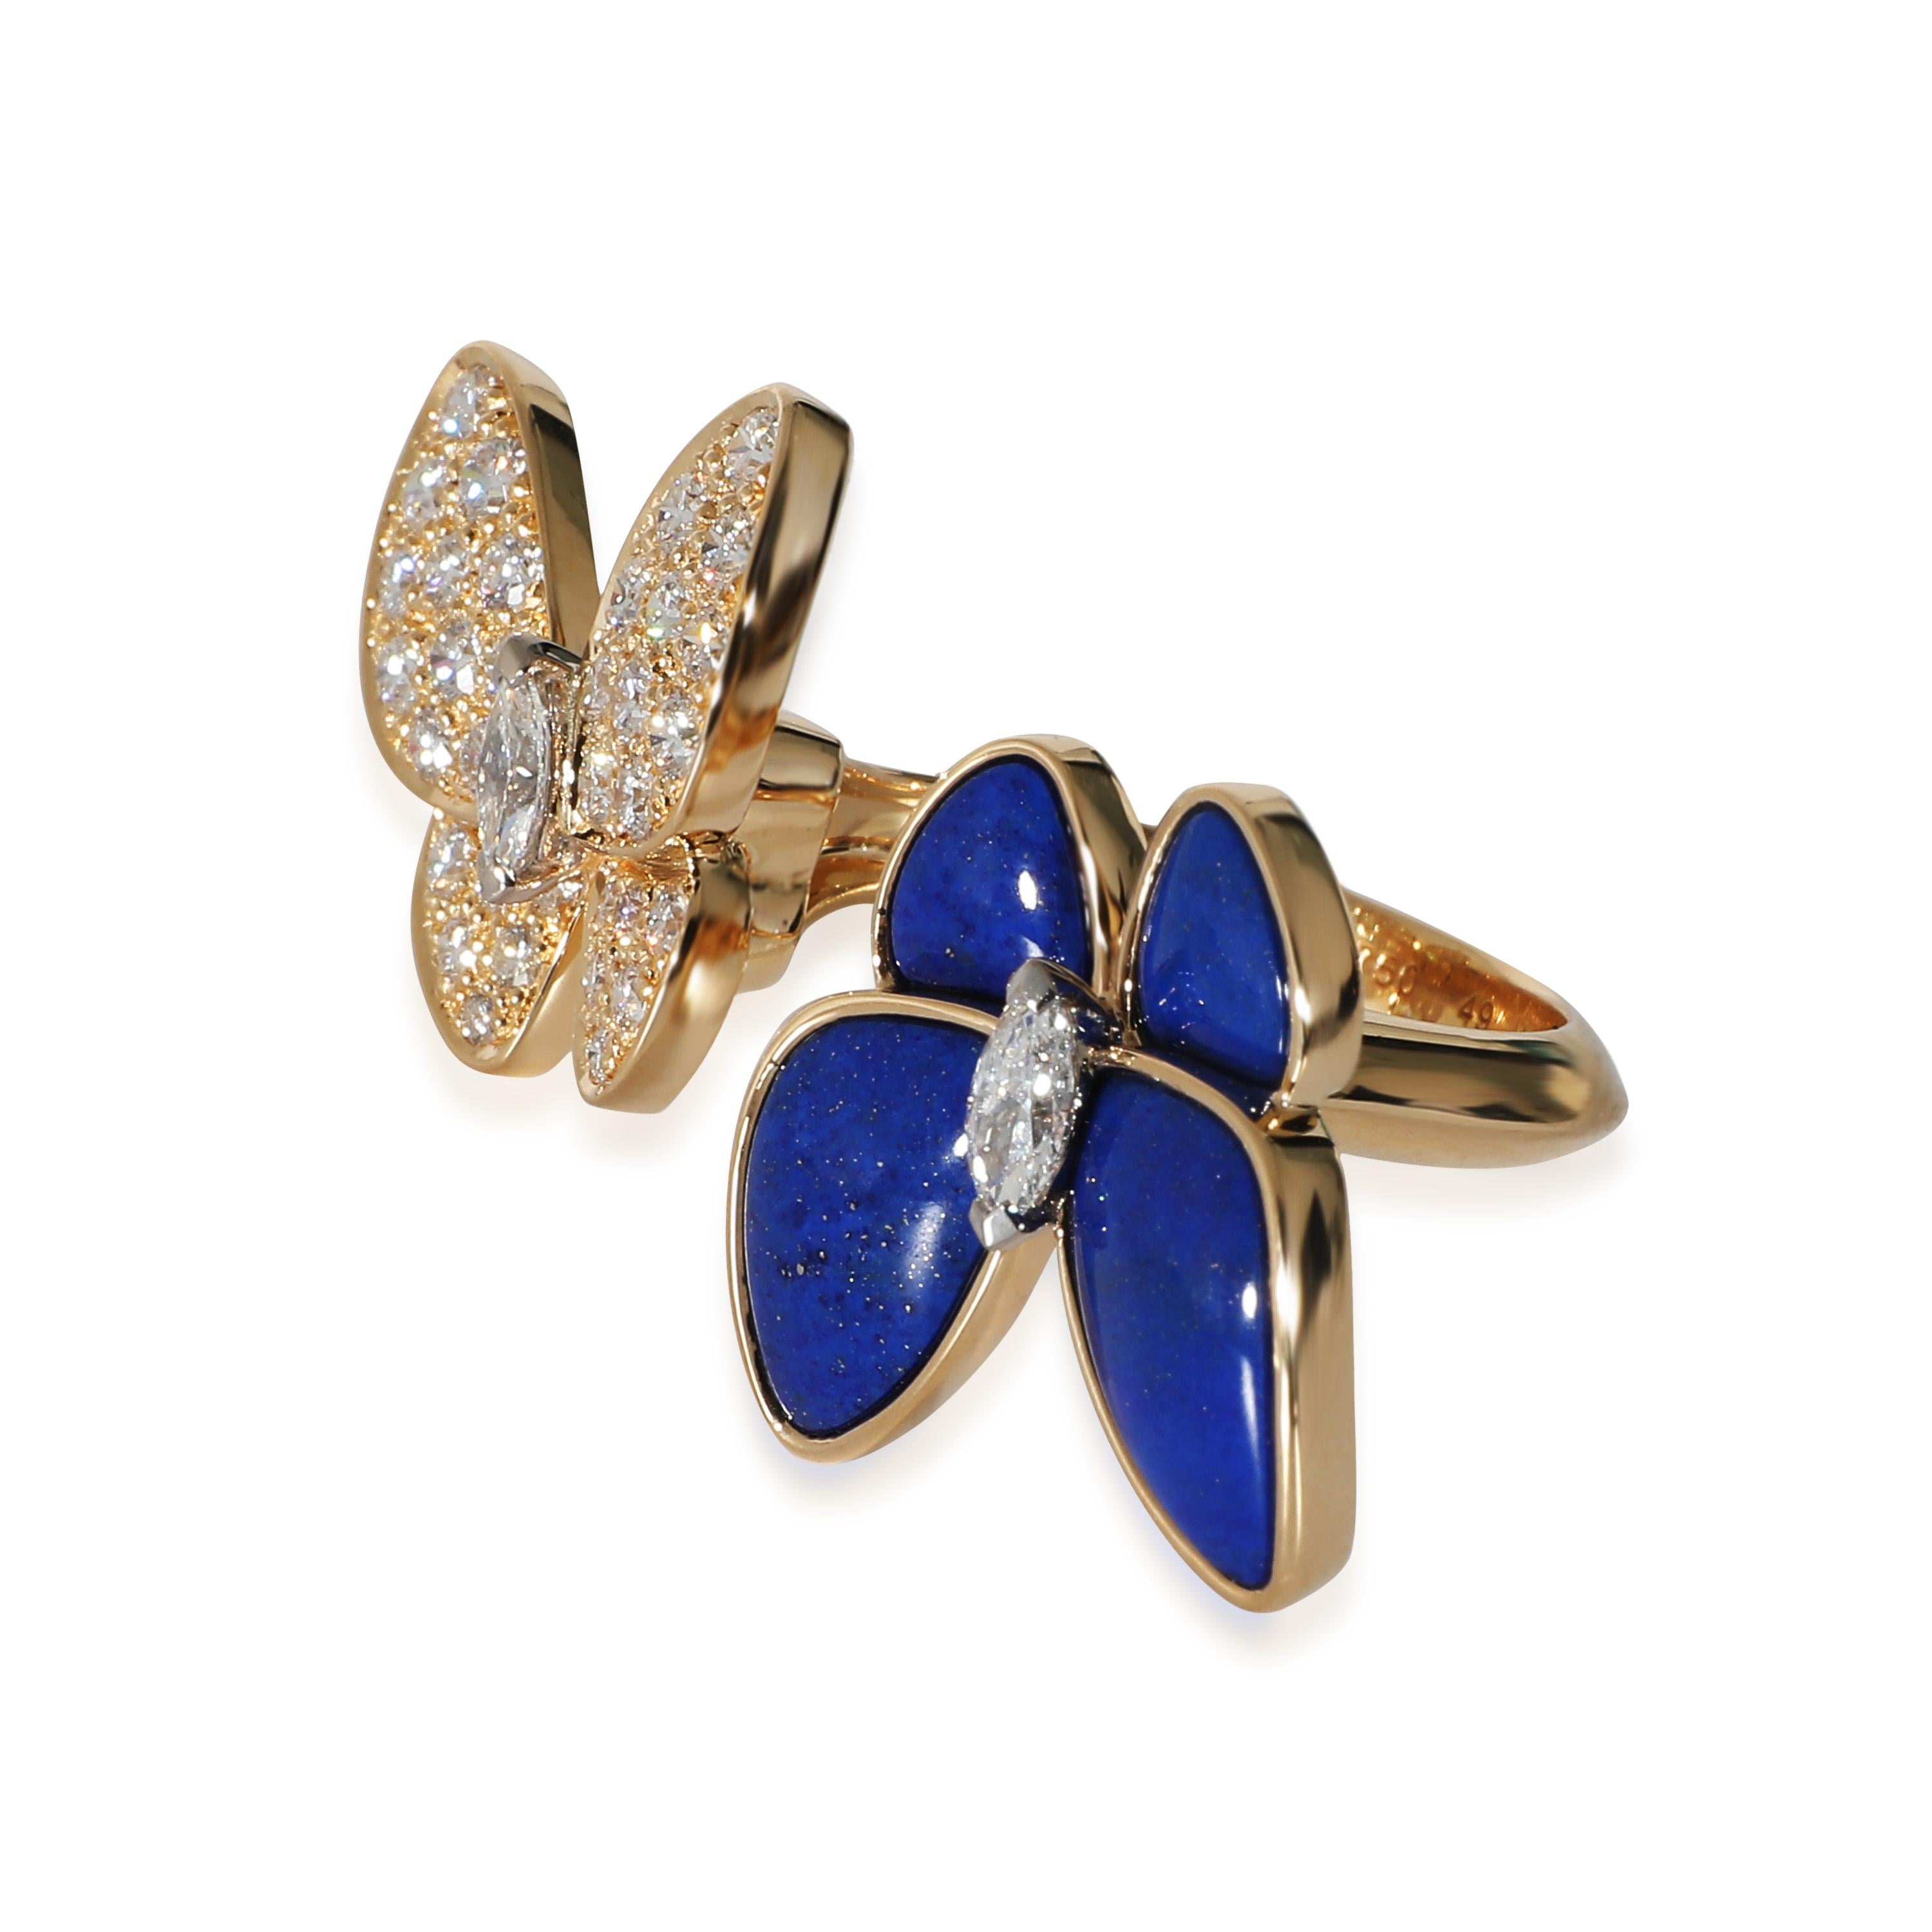 Van Cleef & Arpels Butterfly Ring with Lapis Lazuli & Diamonds 18k Gold 0.99 CTW

PRIMARY DETAILS
SKU: 135629
Listing Title: Van Cleef & Arpels Butterfly Ring with Lapis Lazuli & Diamonds 18k Gold 0.99 CTW
Condition Description: Retails for 23000